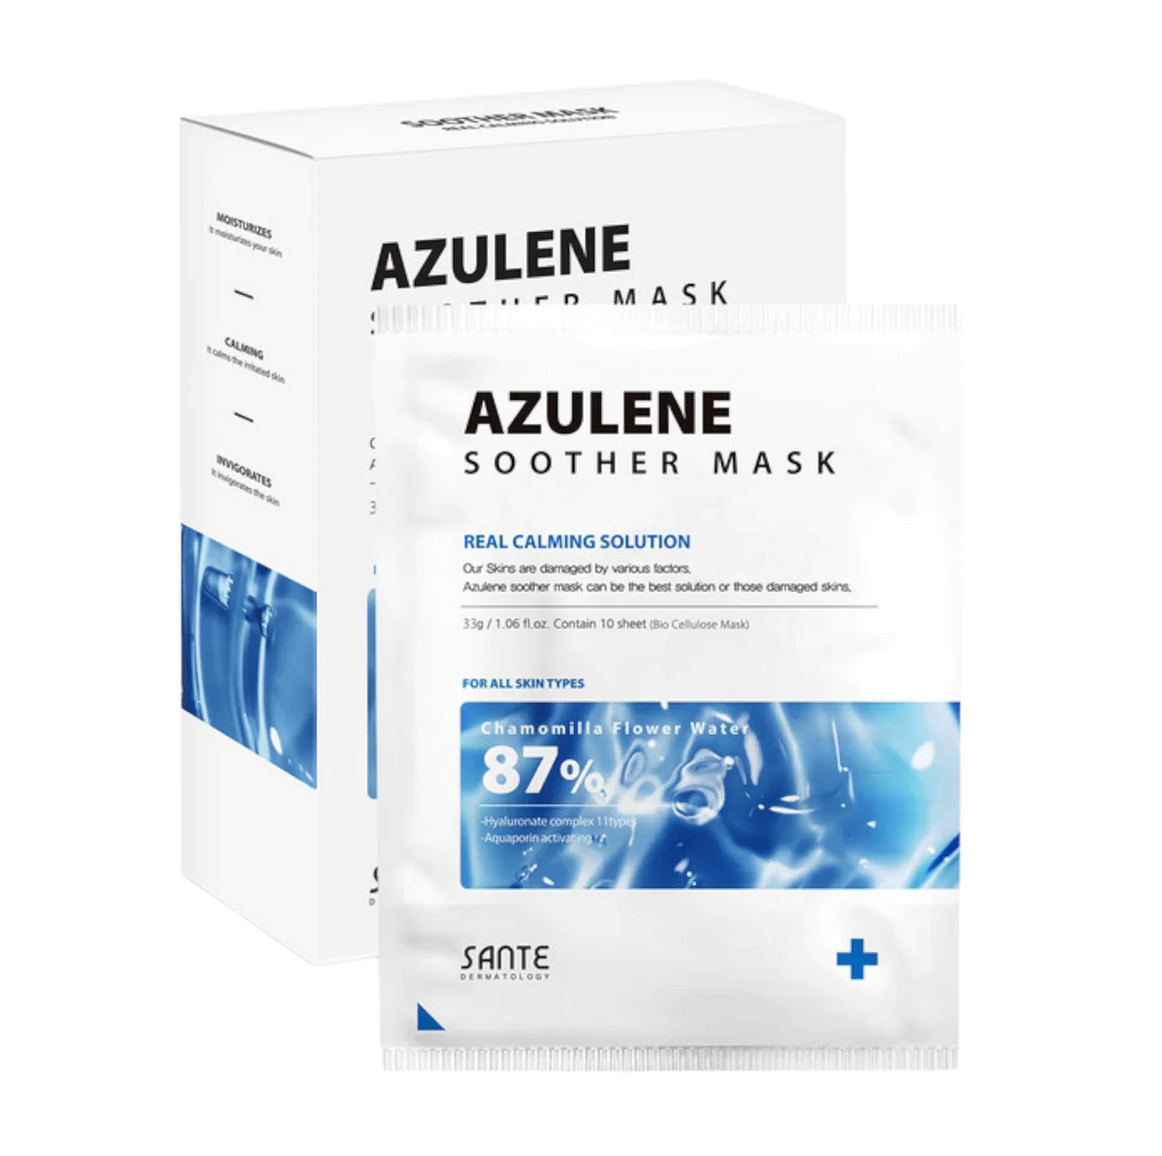 CALMING SKIN SOLUTION | AZULENE Soother Mask